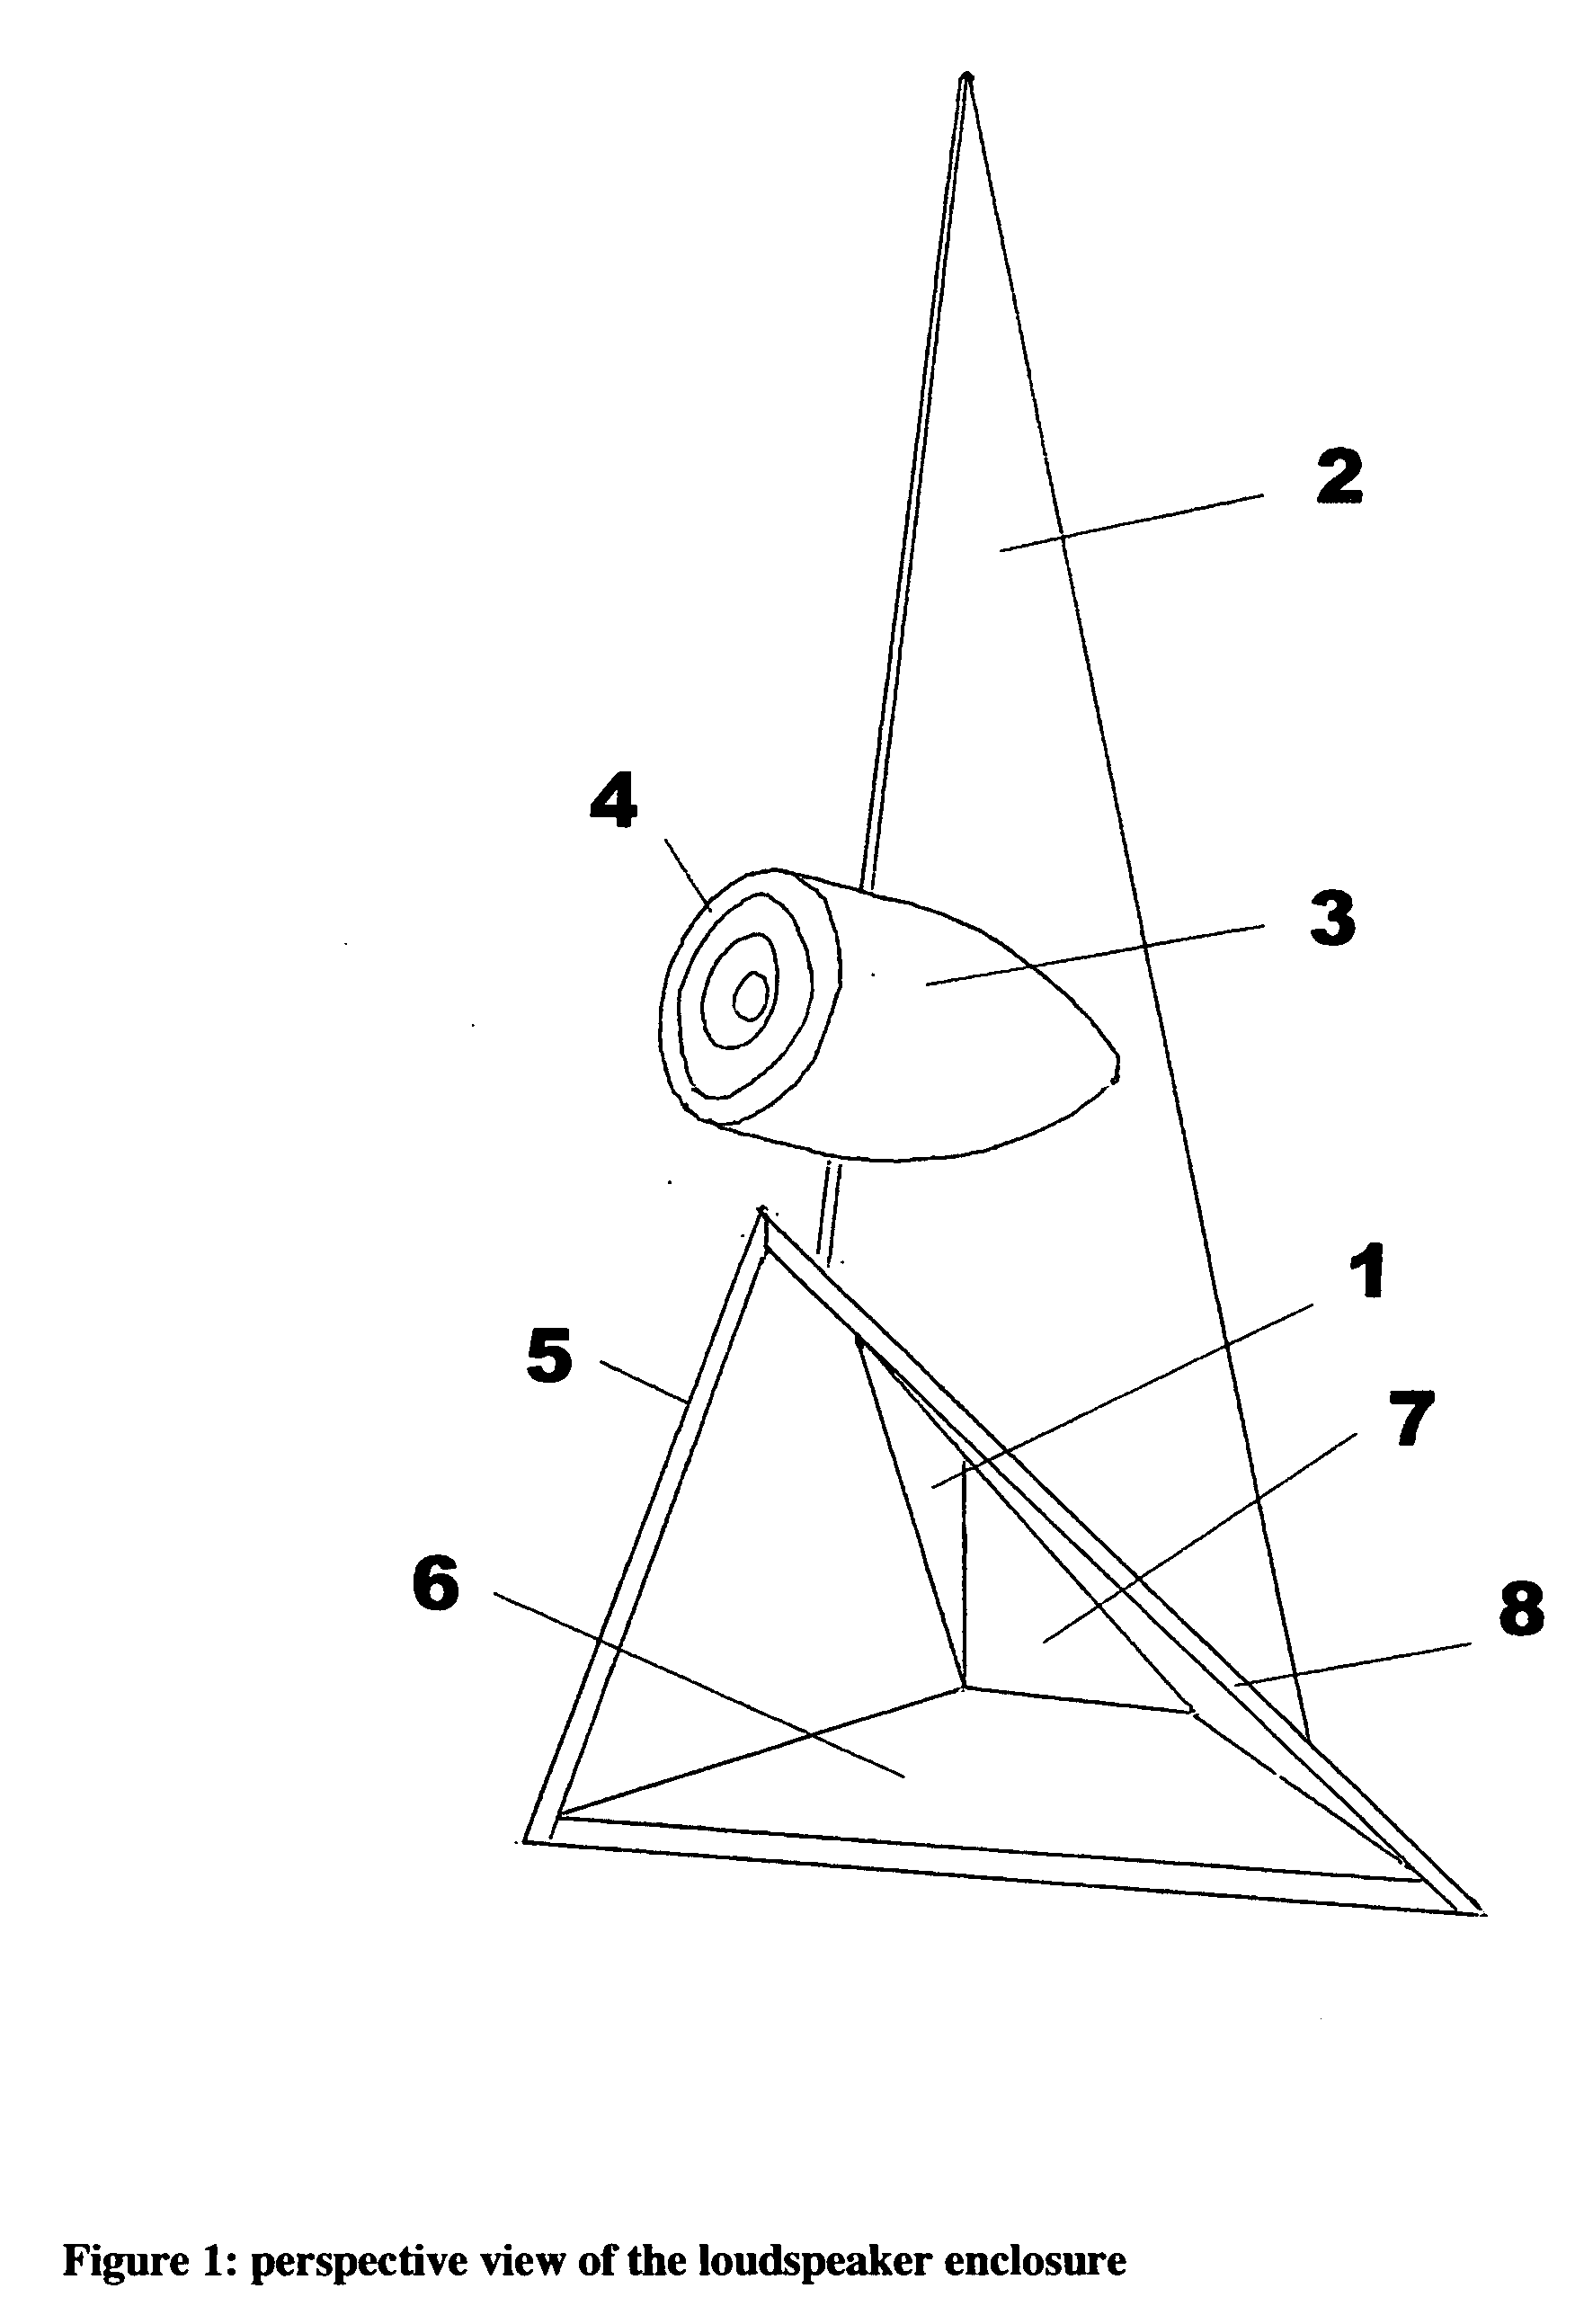 Loudspeaker enclosure with cylindrical compression chamber and tapered triangular folded horn terminating in an extended triangular bell.